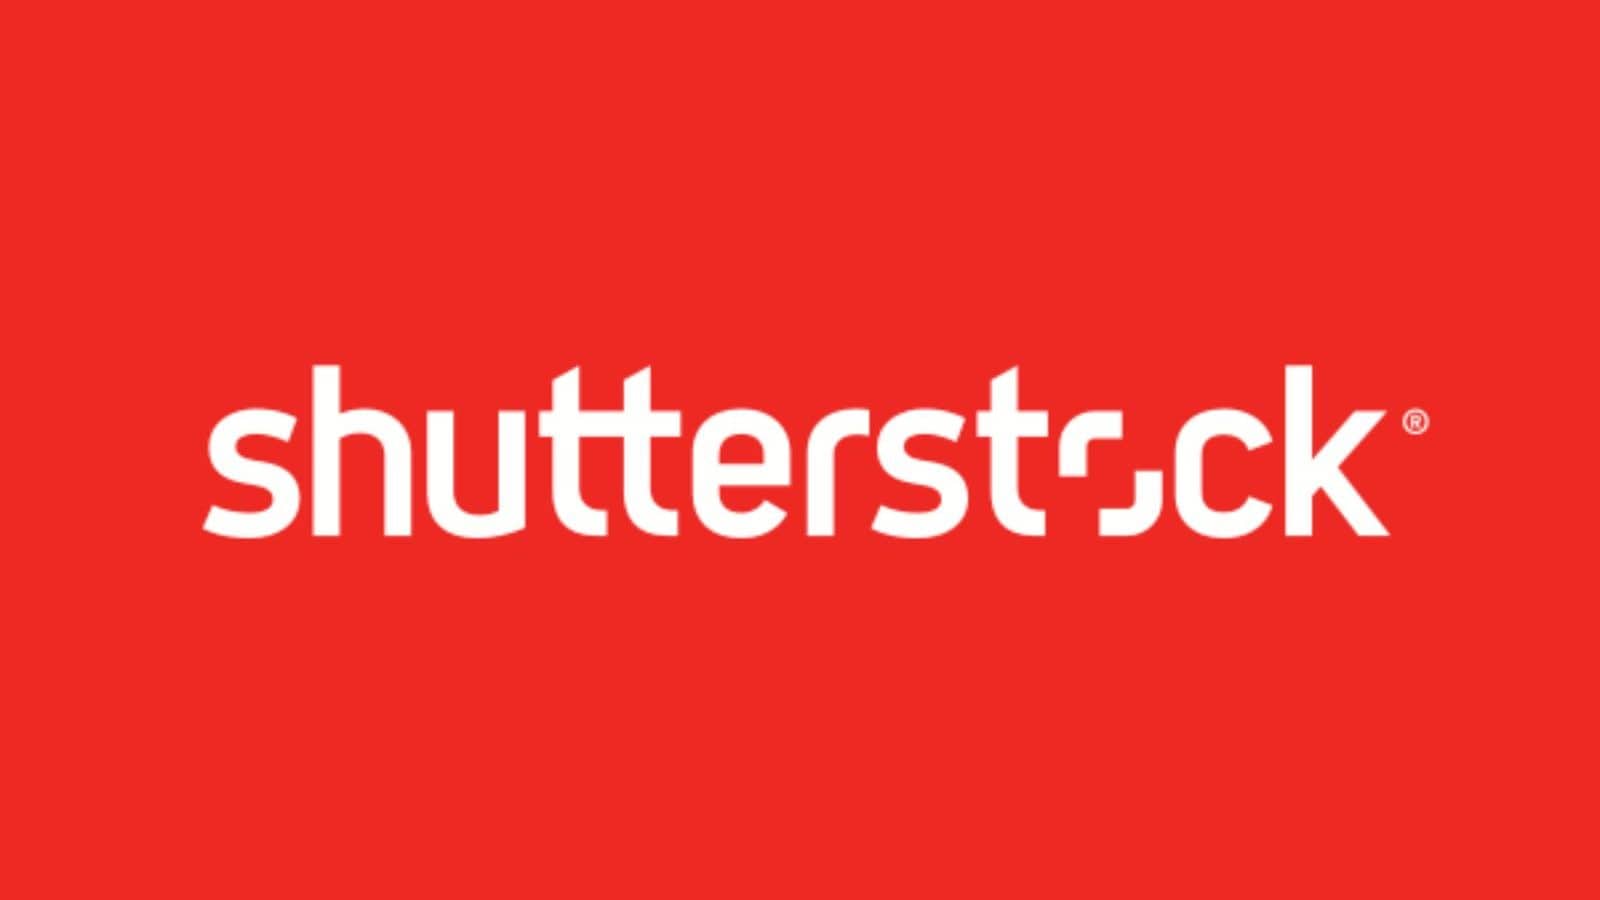 Shutterstock Launches AI-Powered Image Generation Platform: All Details